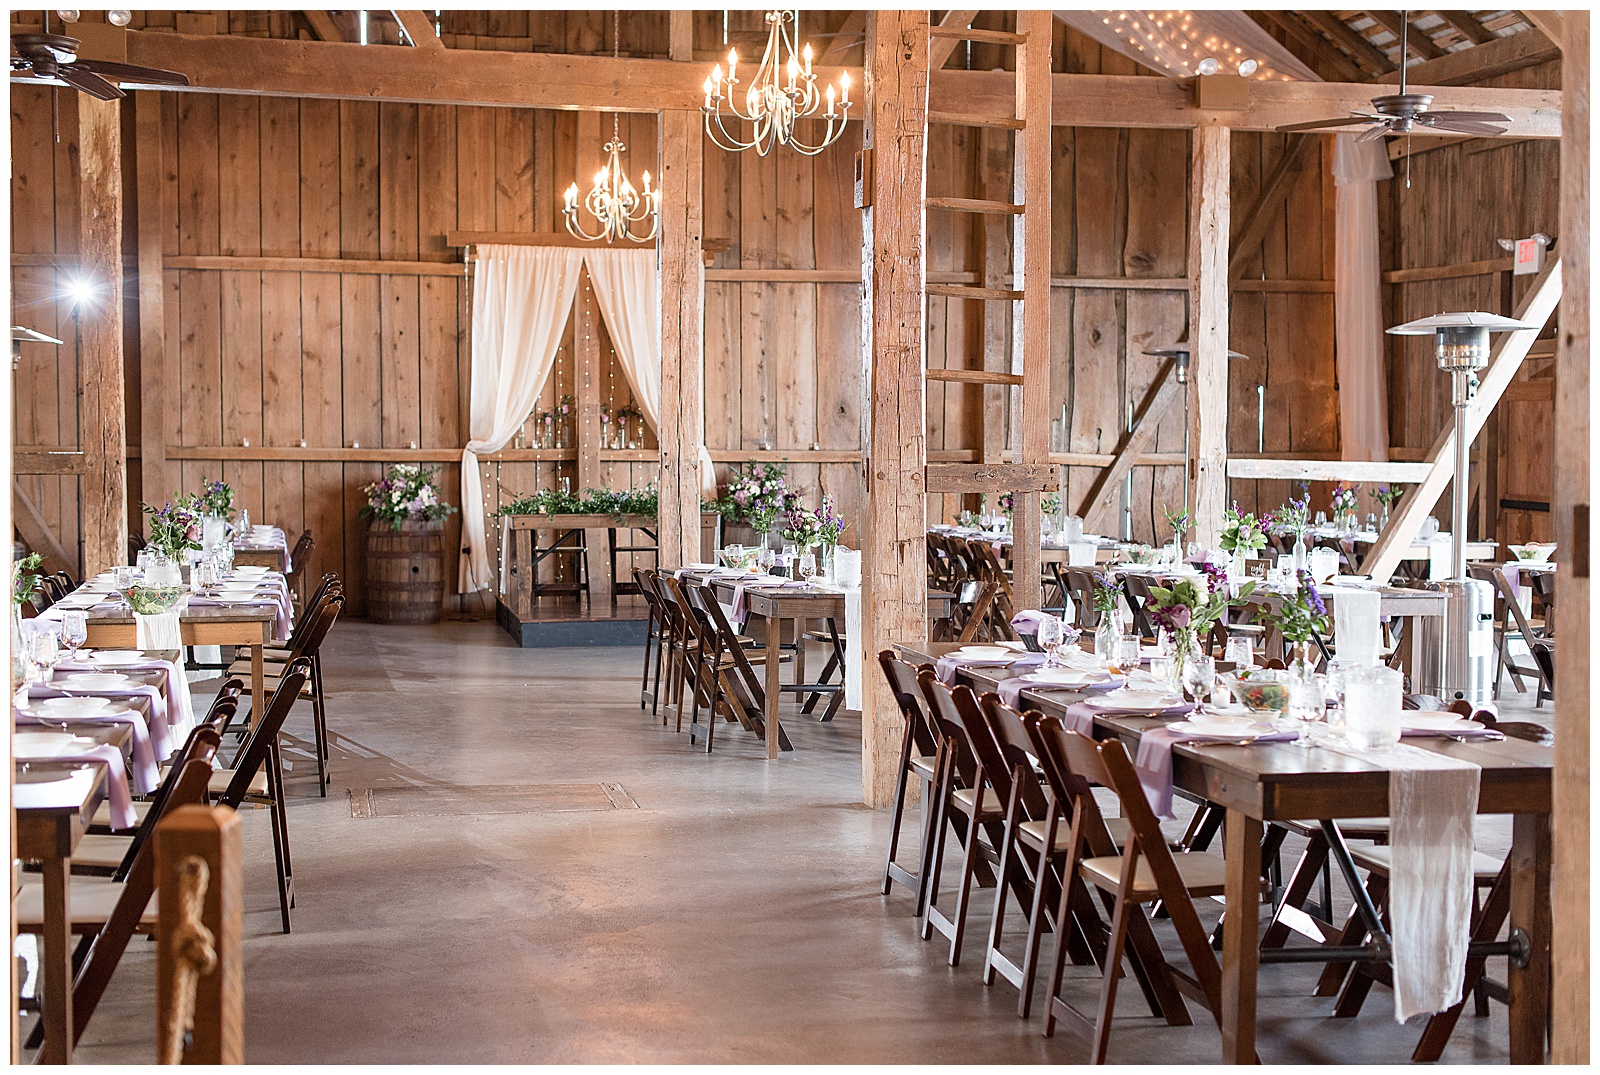 beautiful rustic barn reception area with exposed wooden beams, chandeliers, and wooden tables and chairs